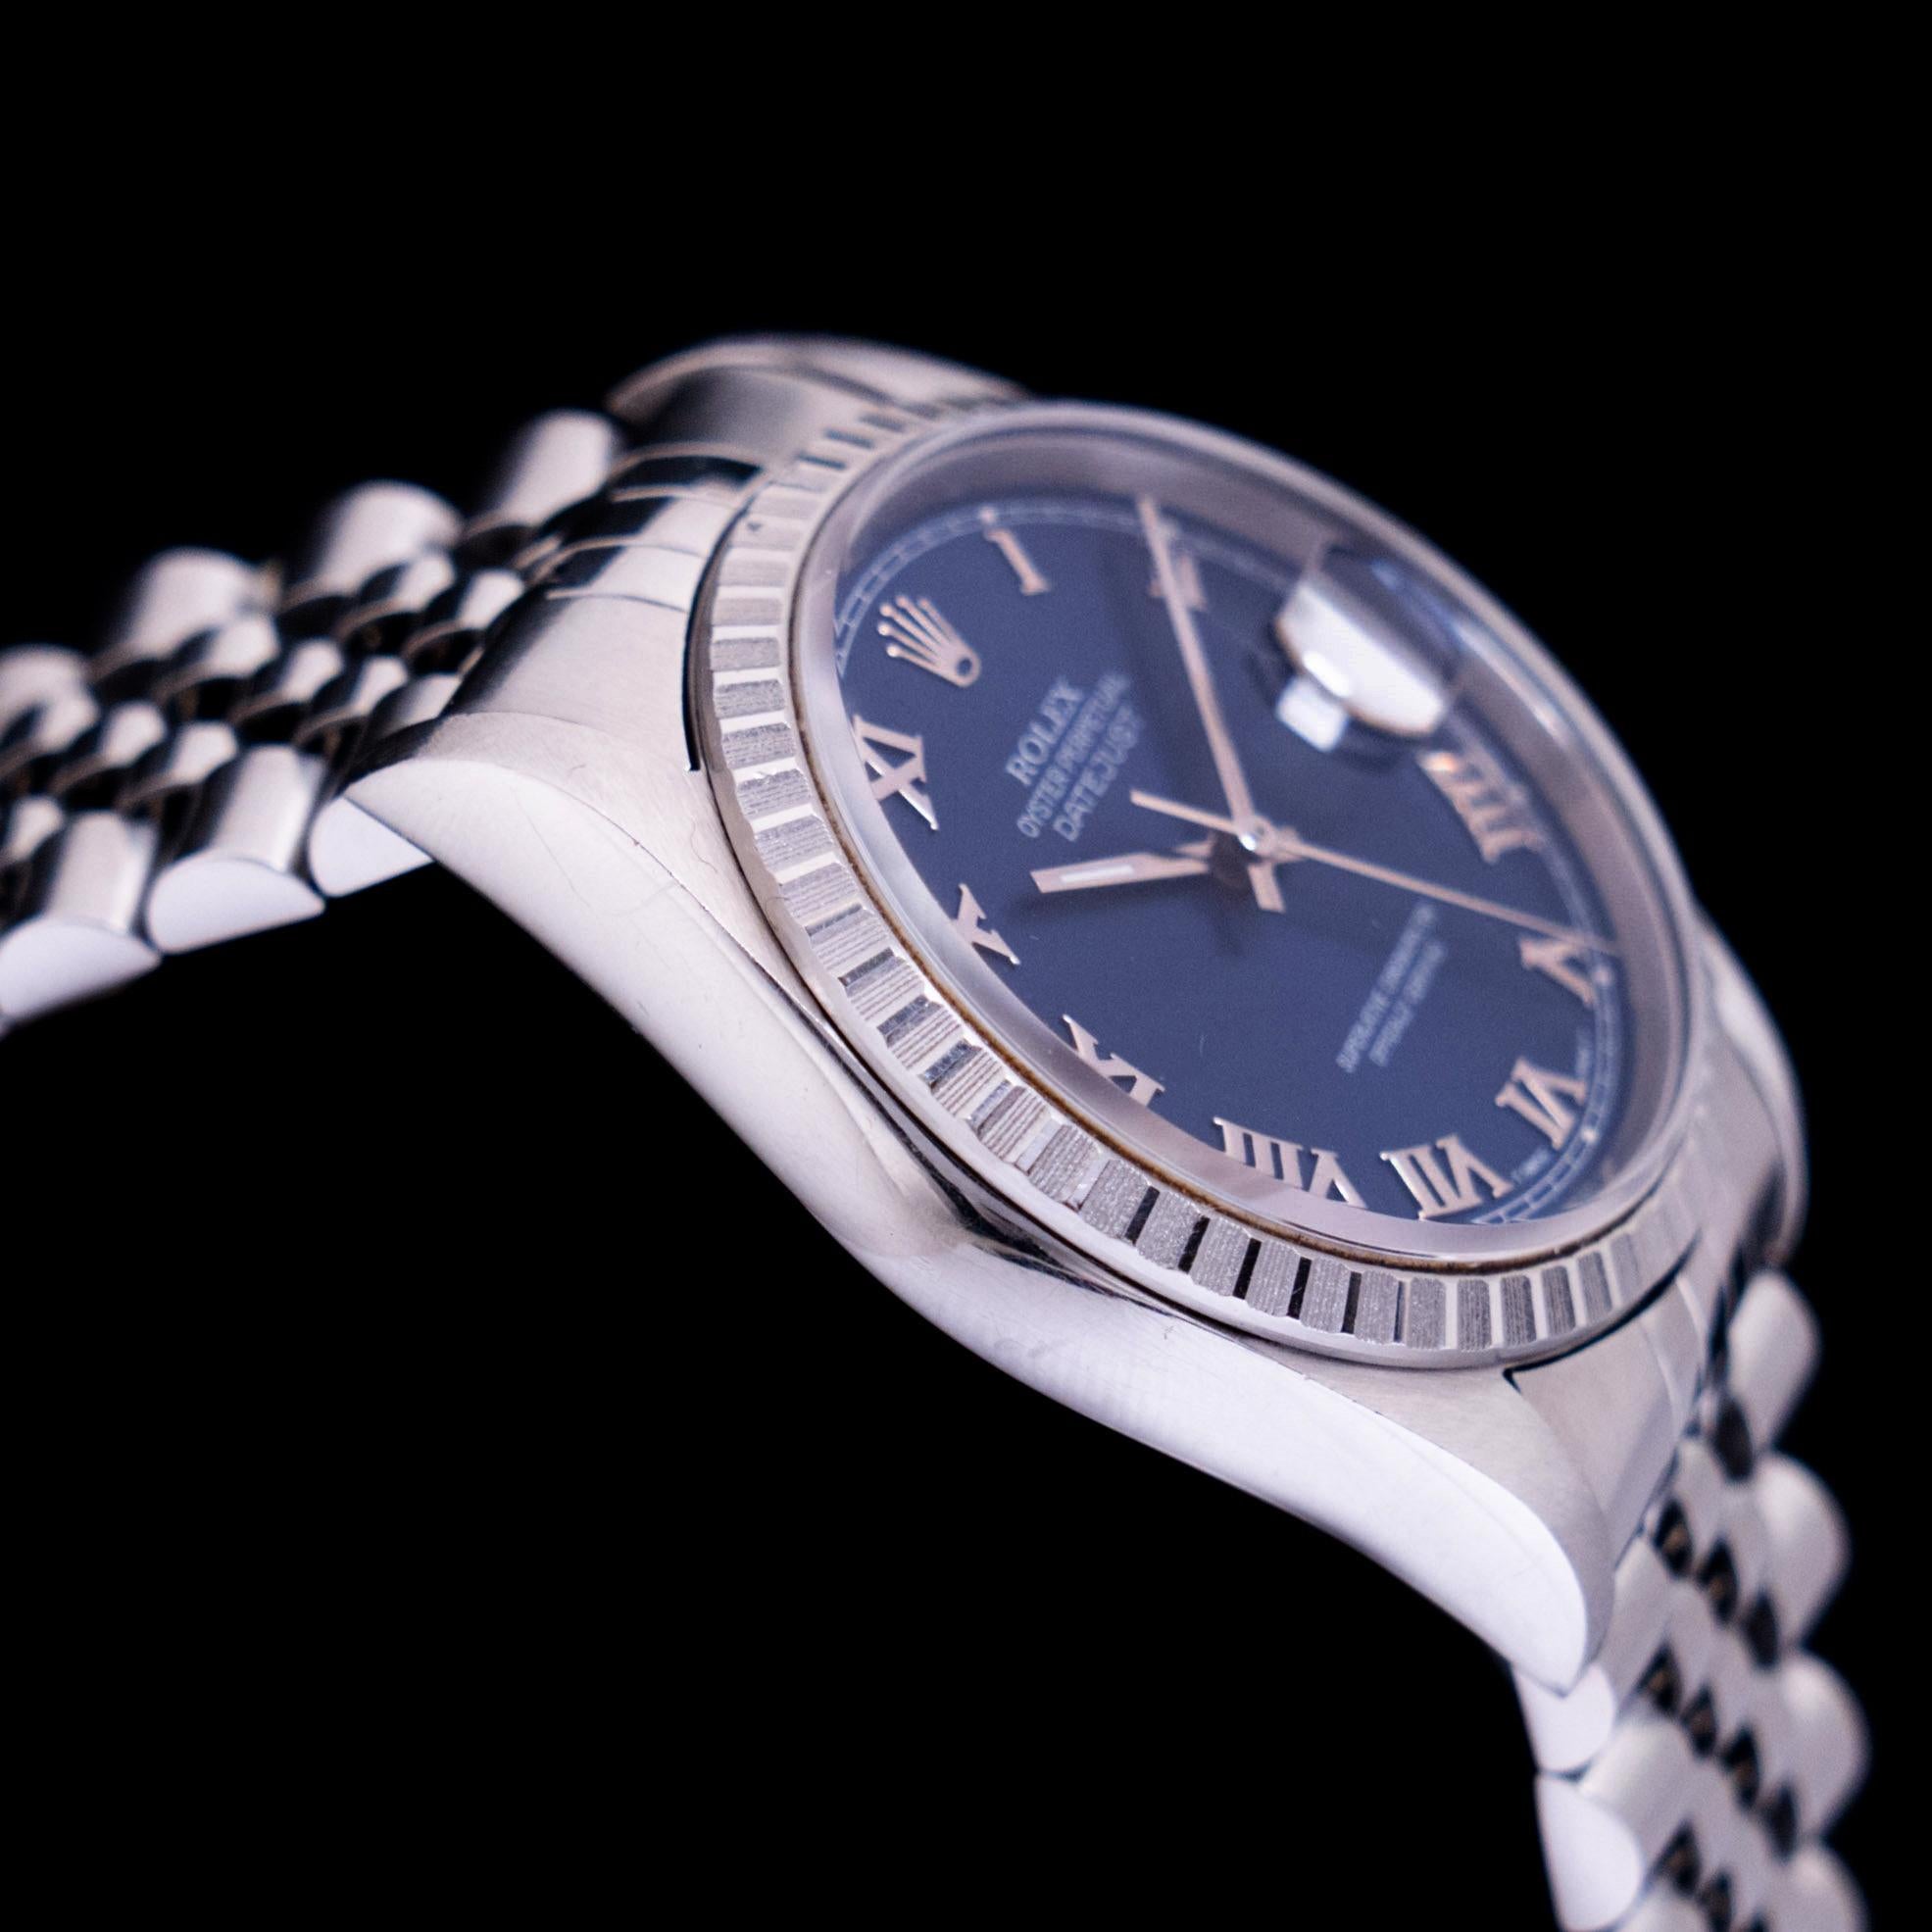 Rolex Steel Oyster Perpetual Datejust Blue Roman Dial 16220 Watch w/ Paper, 1993 For Sale 1